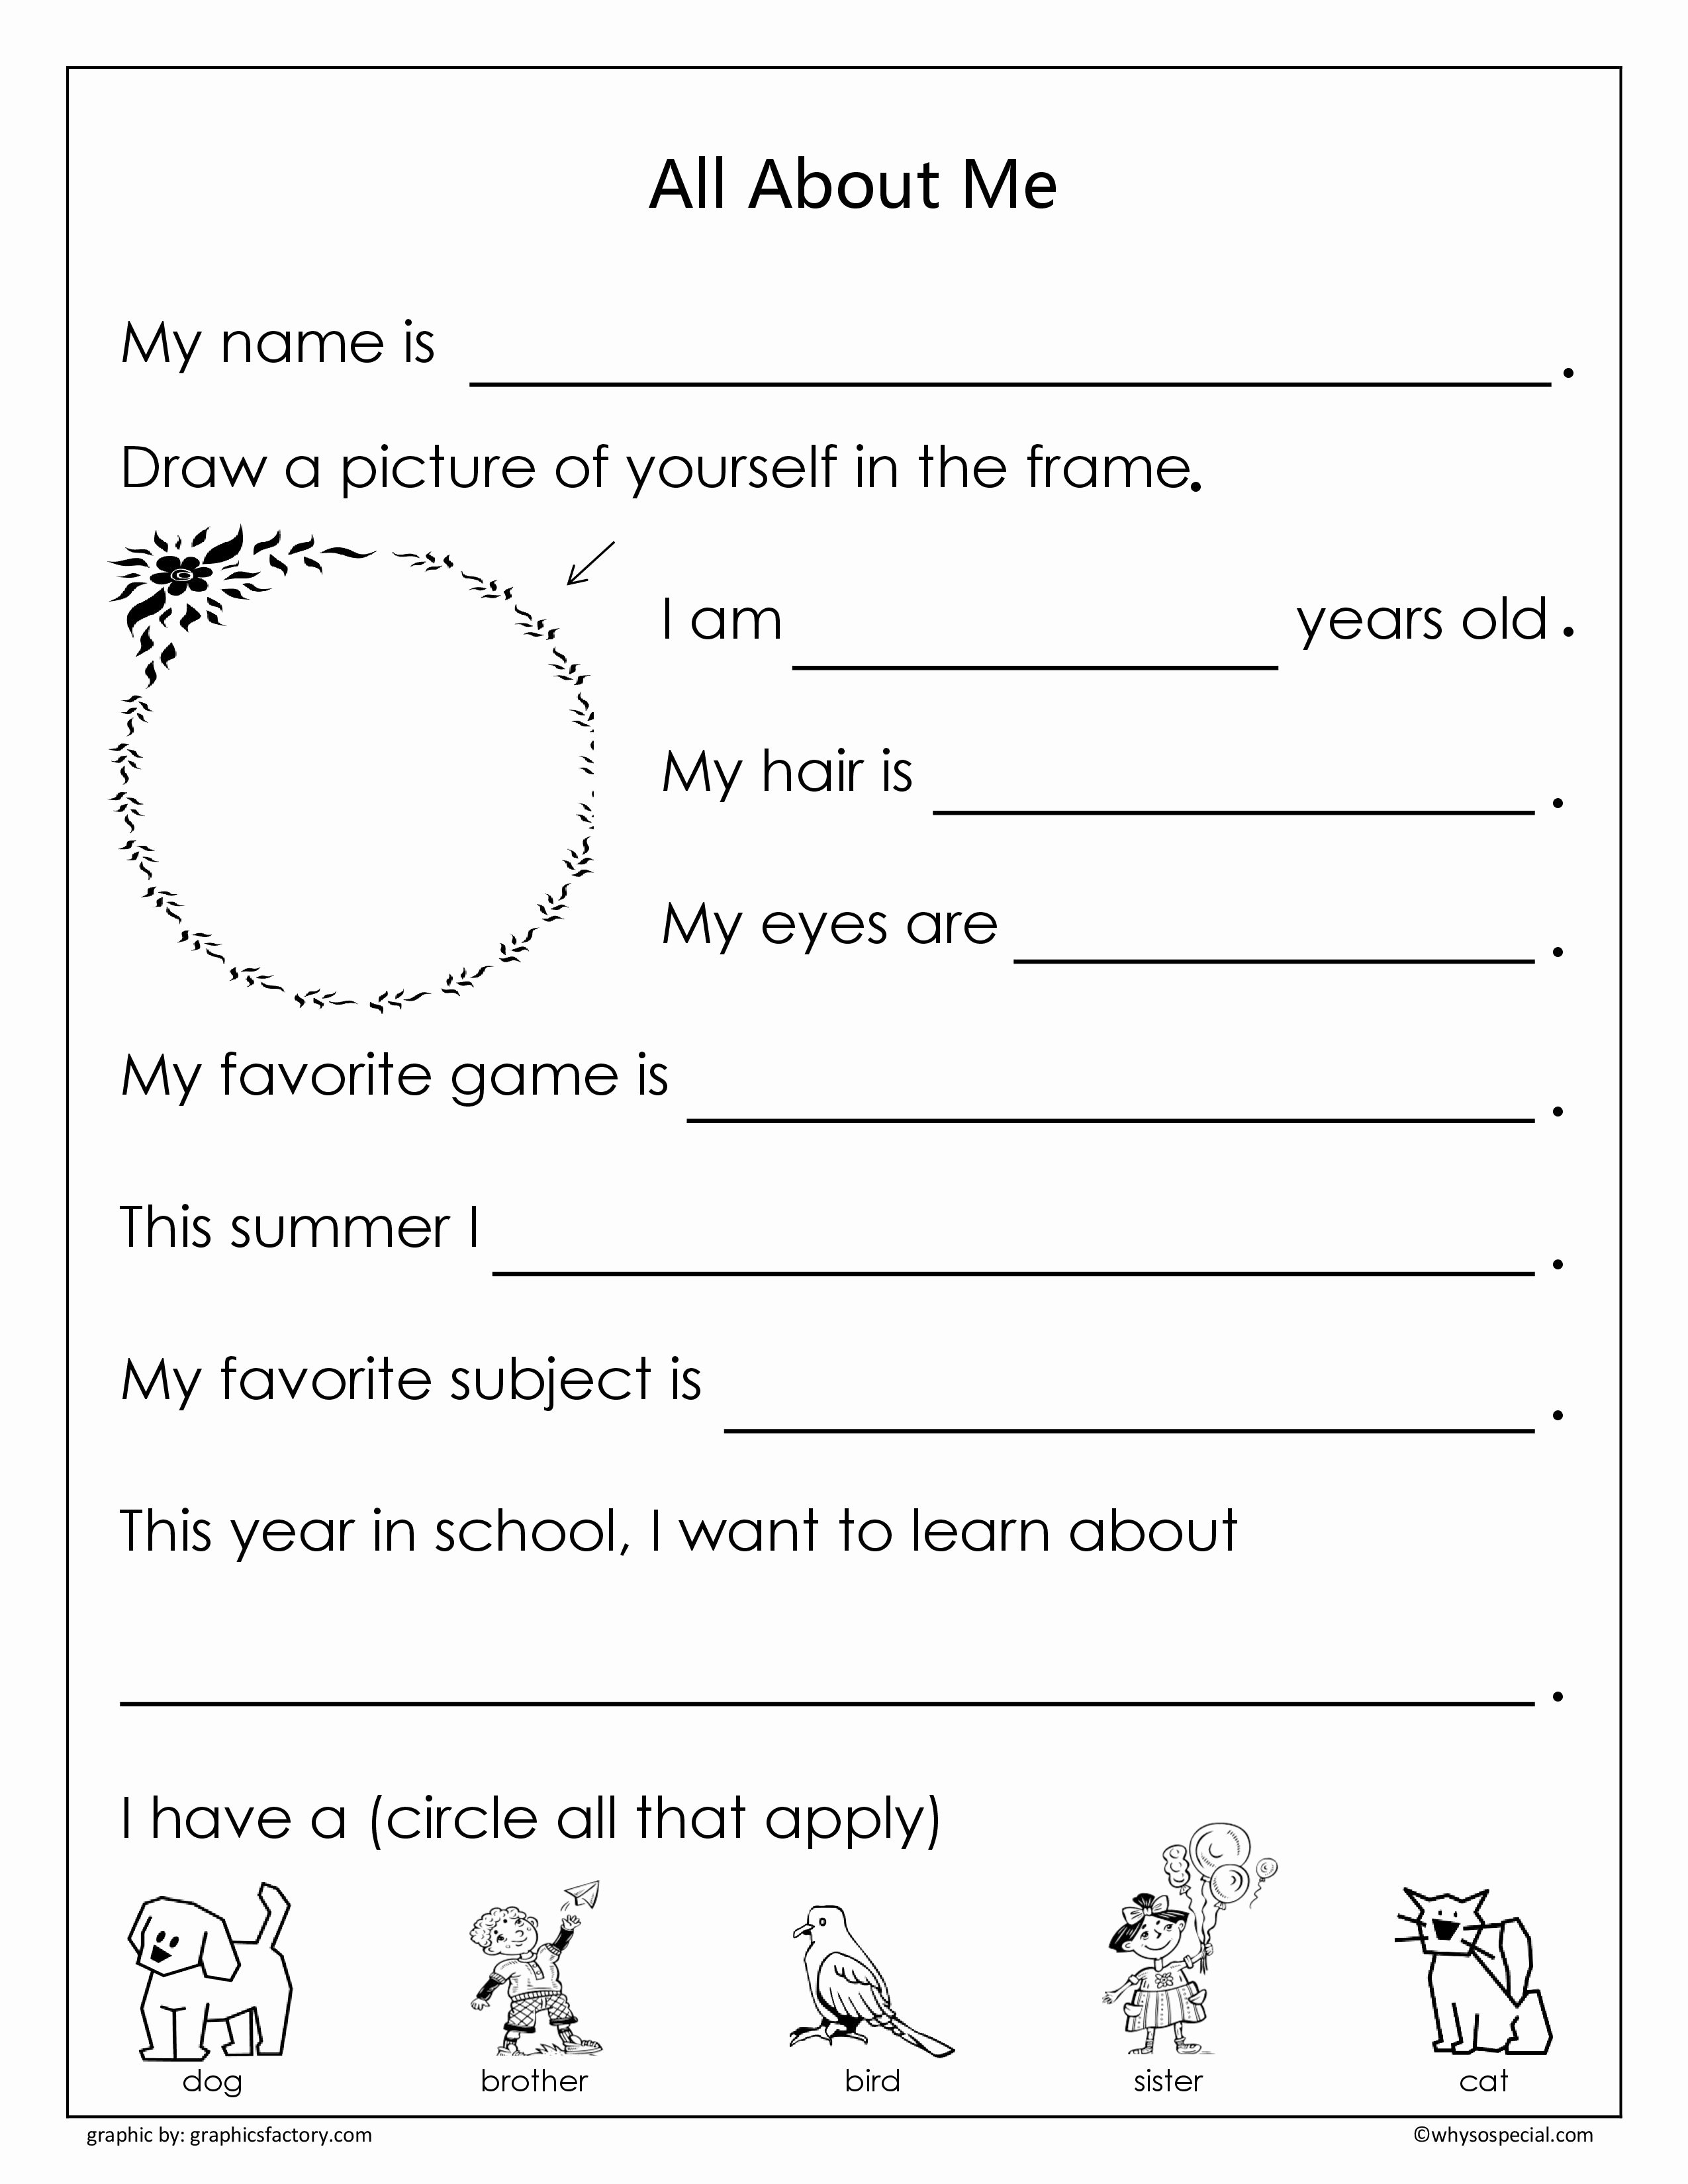 All About Me Worksheet Pdf Lovely First Day Of School Student Worksheet